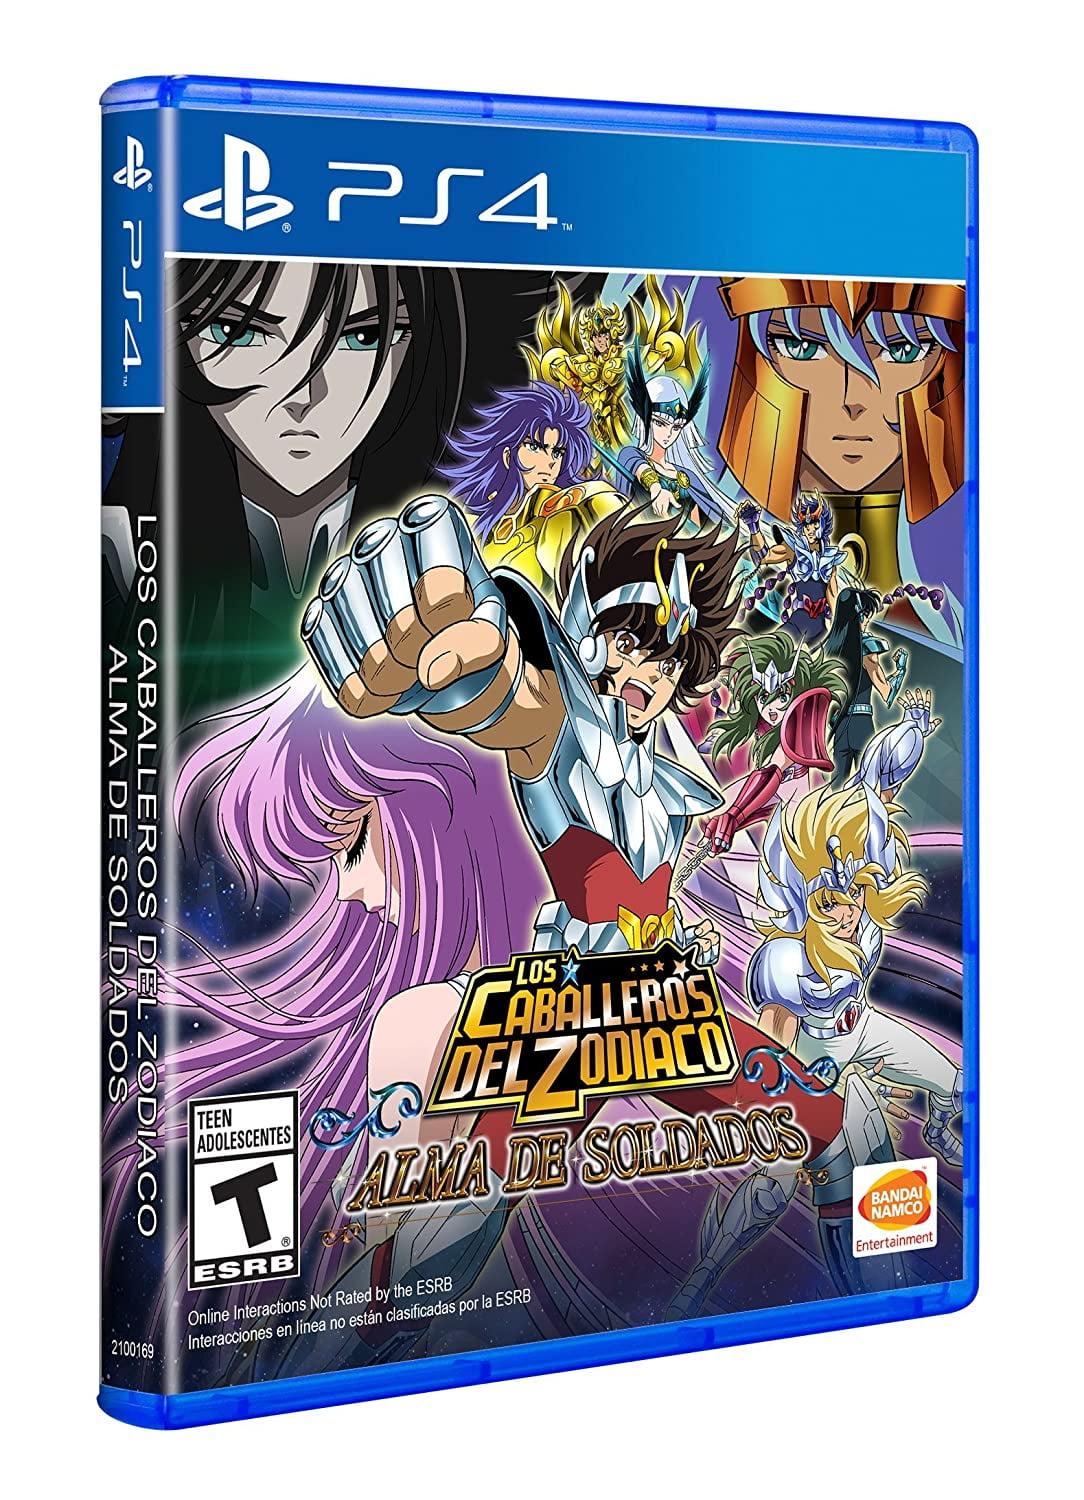 Saint Seiya: Soldiers' Soul Blows PS4 and PS3 Away This September